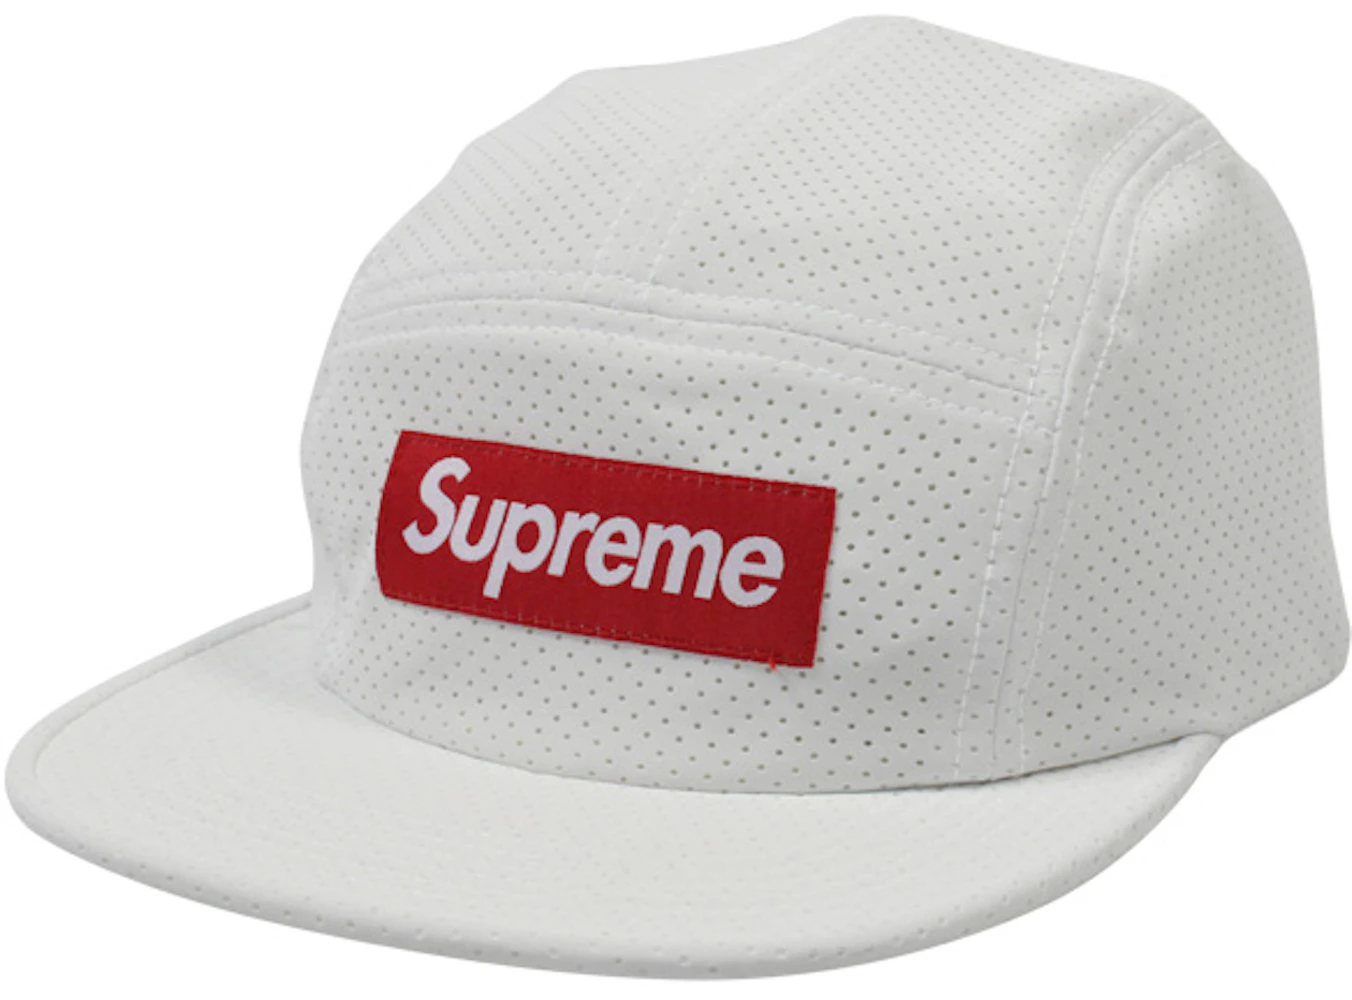 X \ Heated Sneaks على X: Supreme SS16 Perforated Camp Cap🔥 This and 3M S  Logo Caps are must cops! Best Supreme Bot